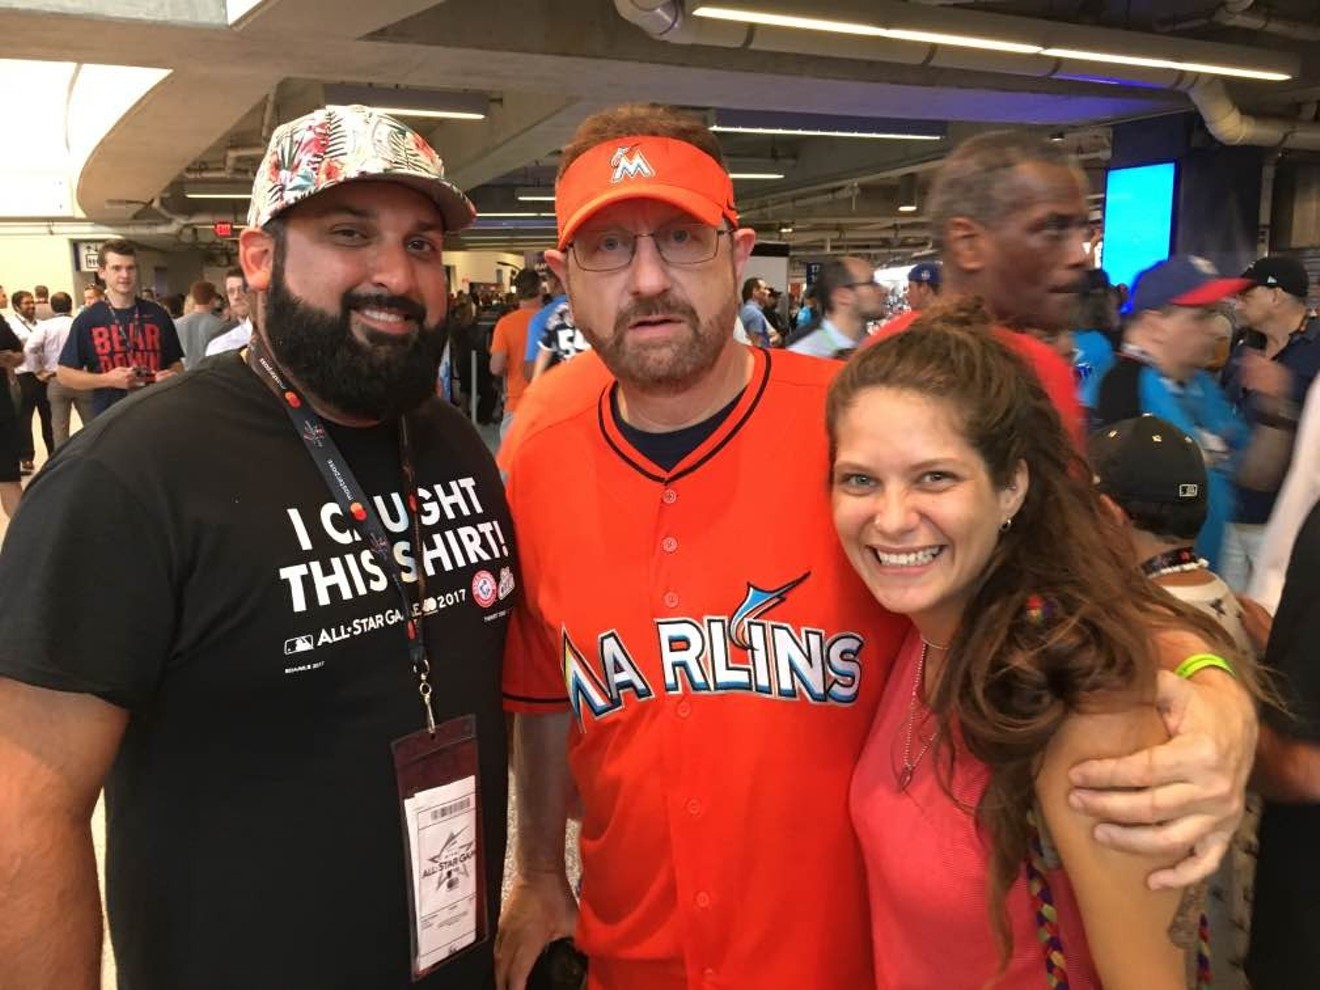 Laurence Leavy, AKA Marlins Man (center), and friends.